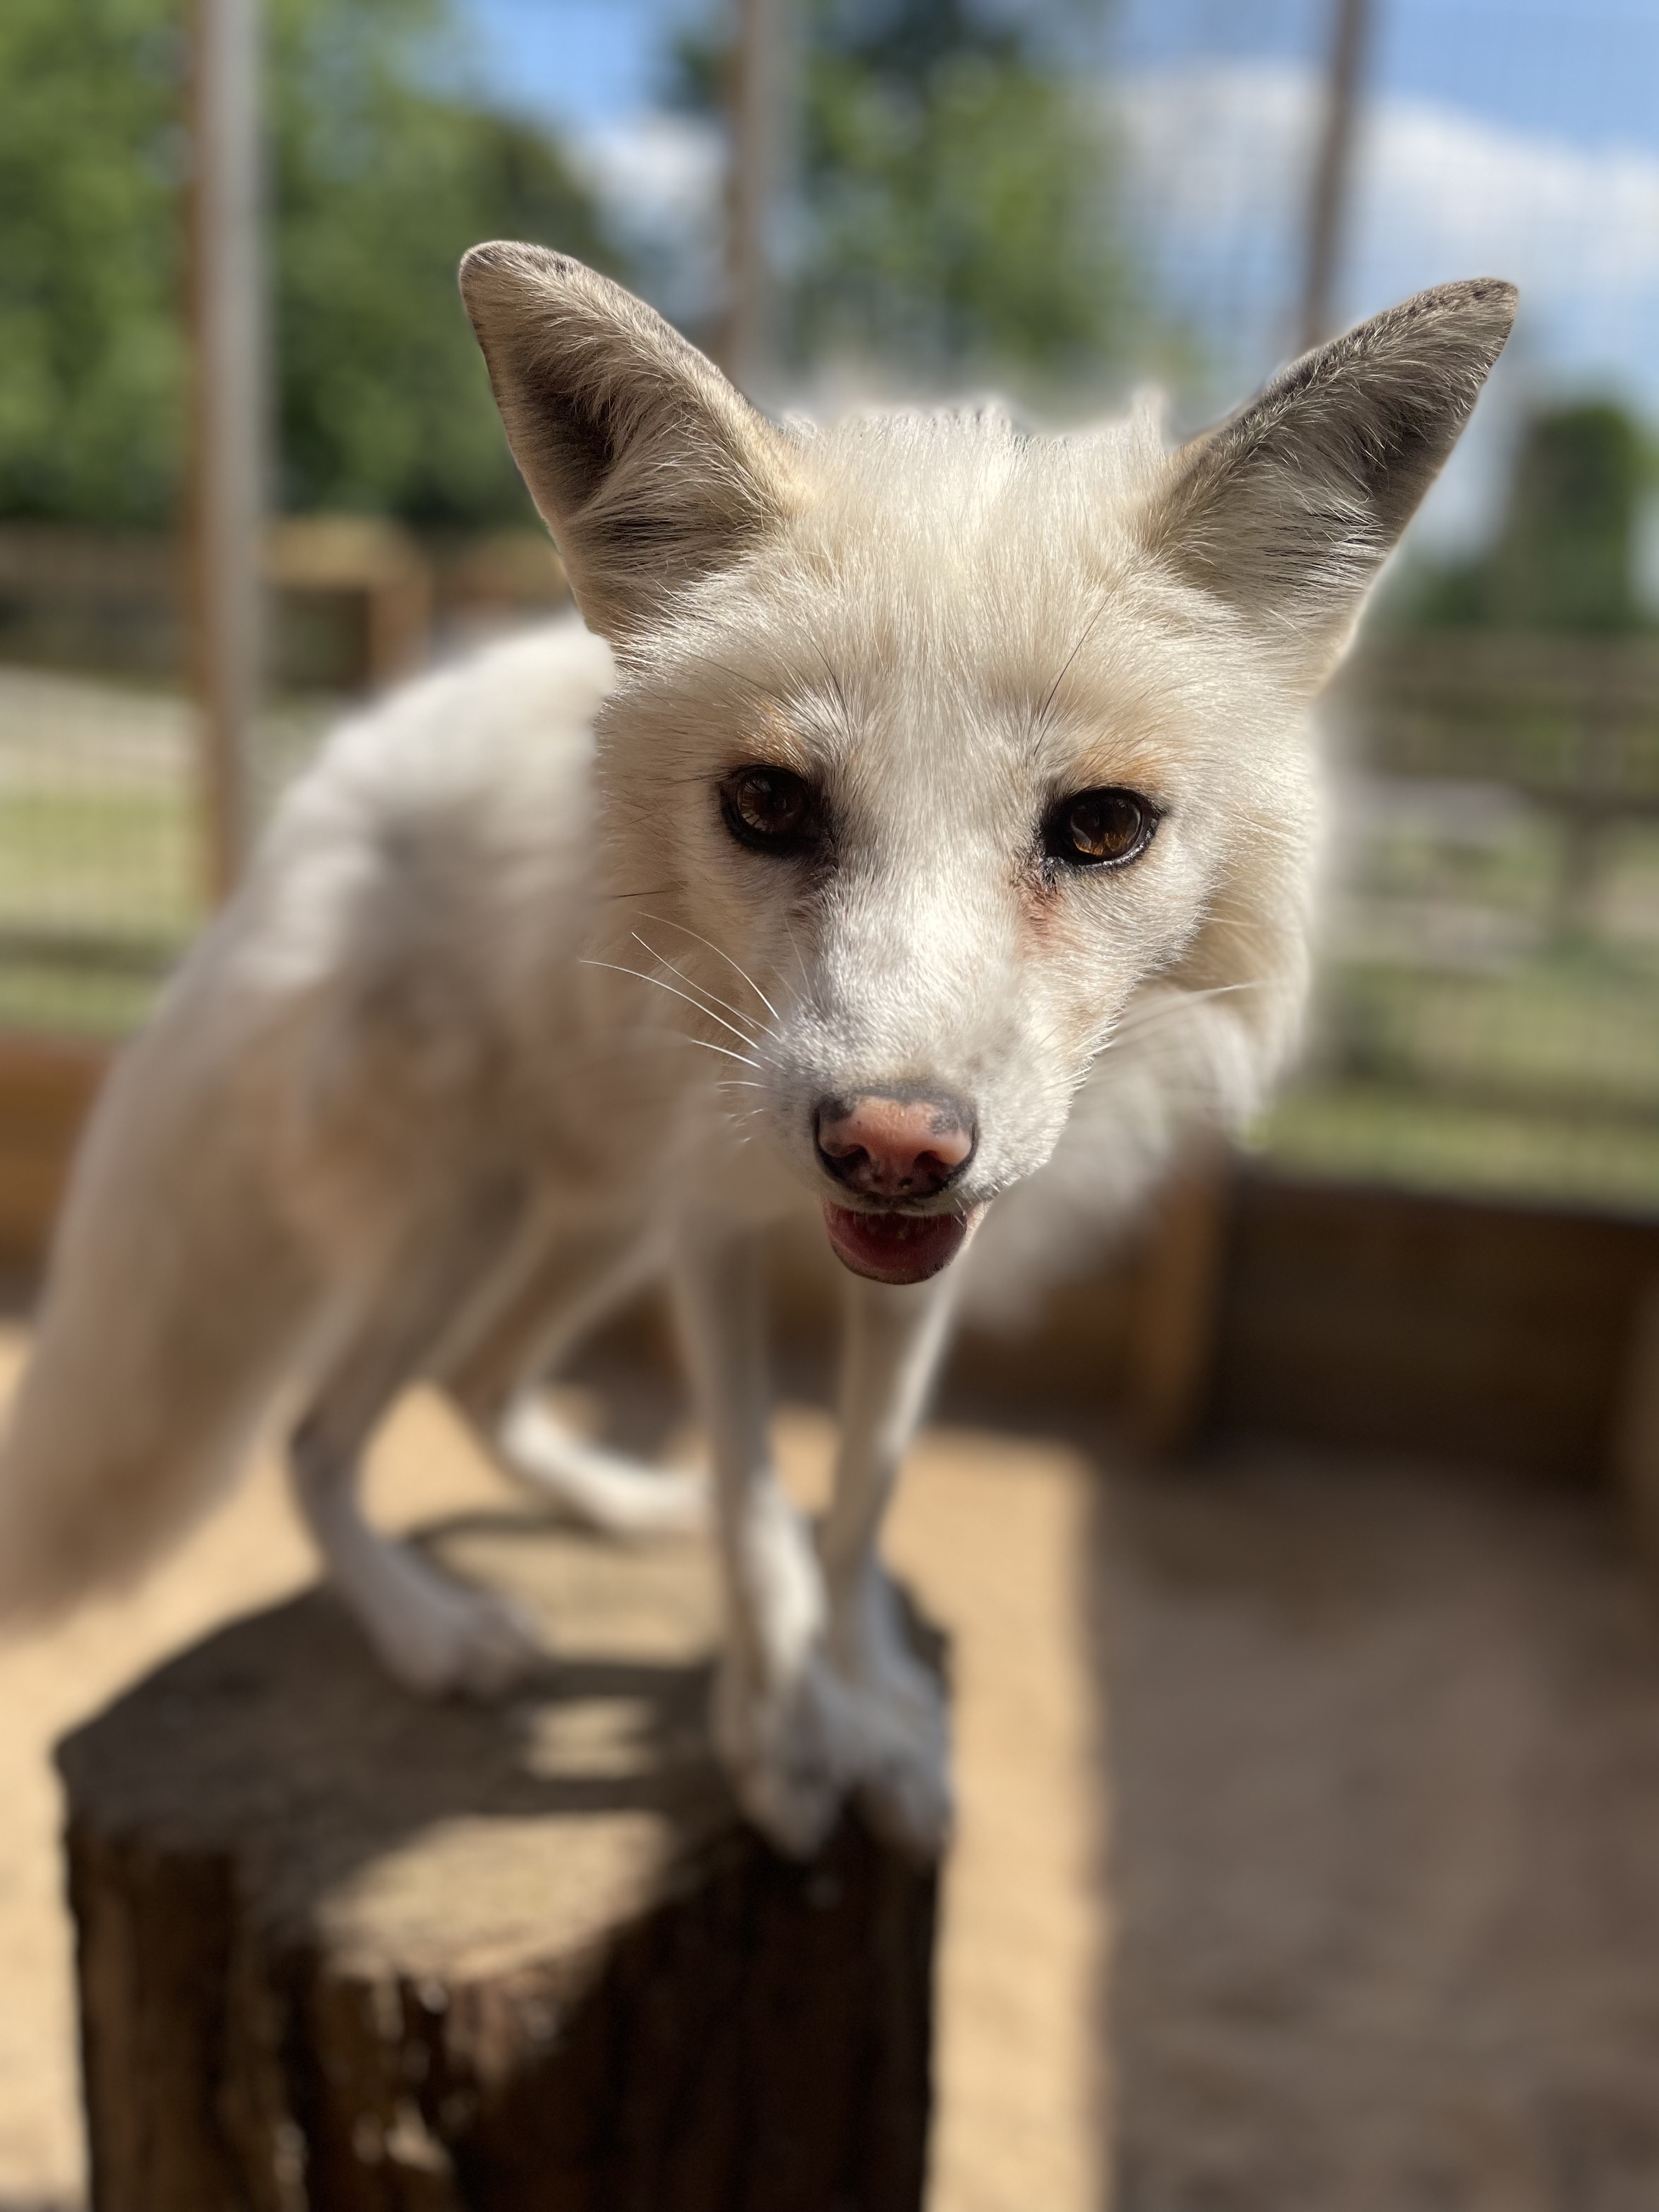 Jasper the silver fox has learned to trust again after being rescued from the fur trade